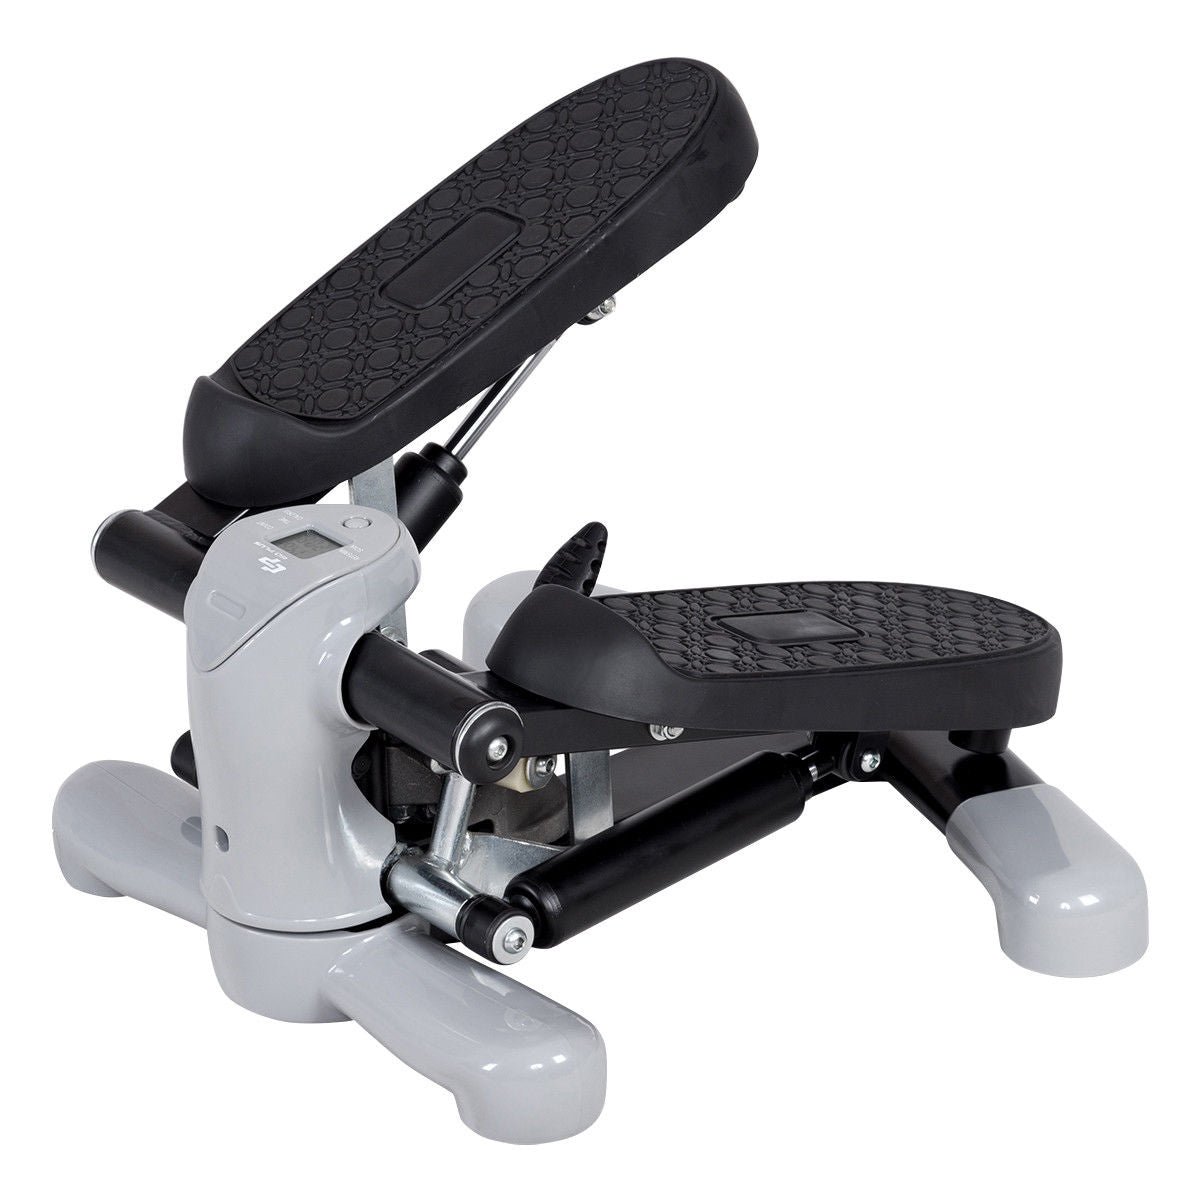 Степпер American Motion Fitness Air Climber s11